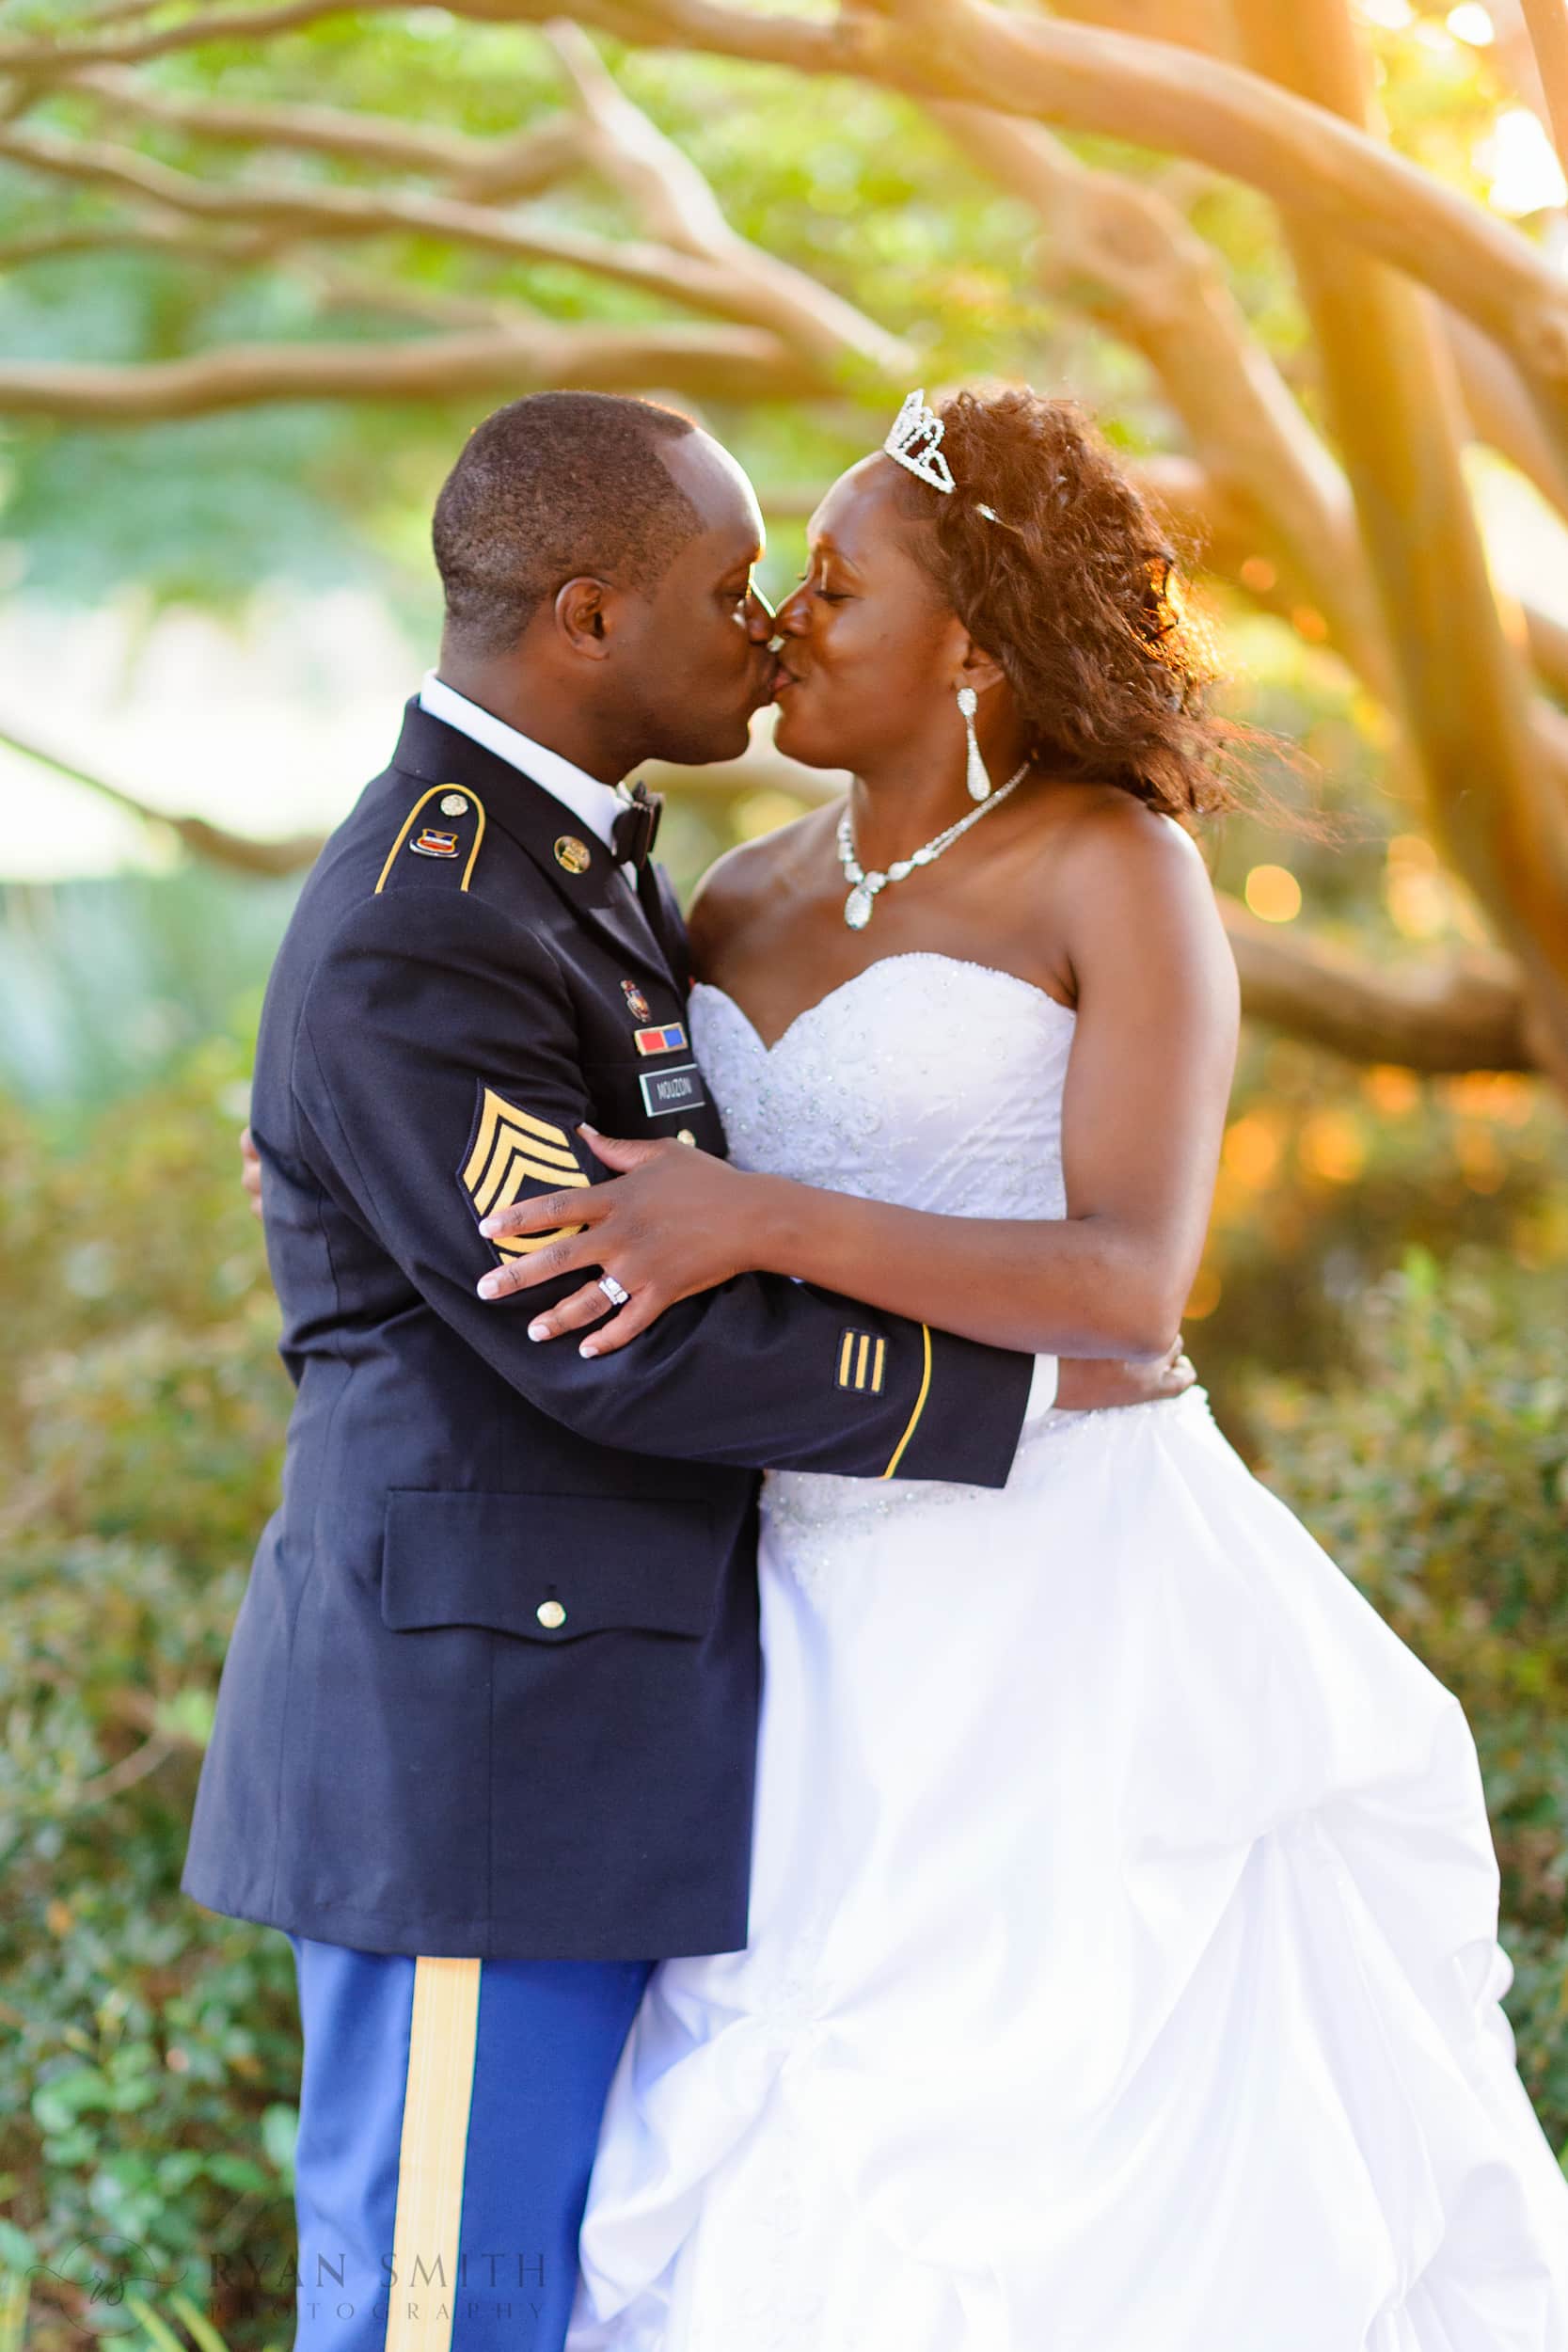 Bride and groom in military uniform backlit by sunset - Pine Lakes